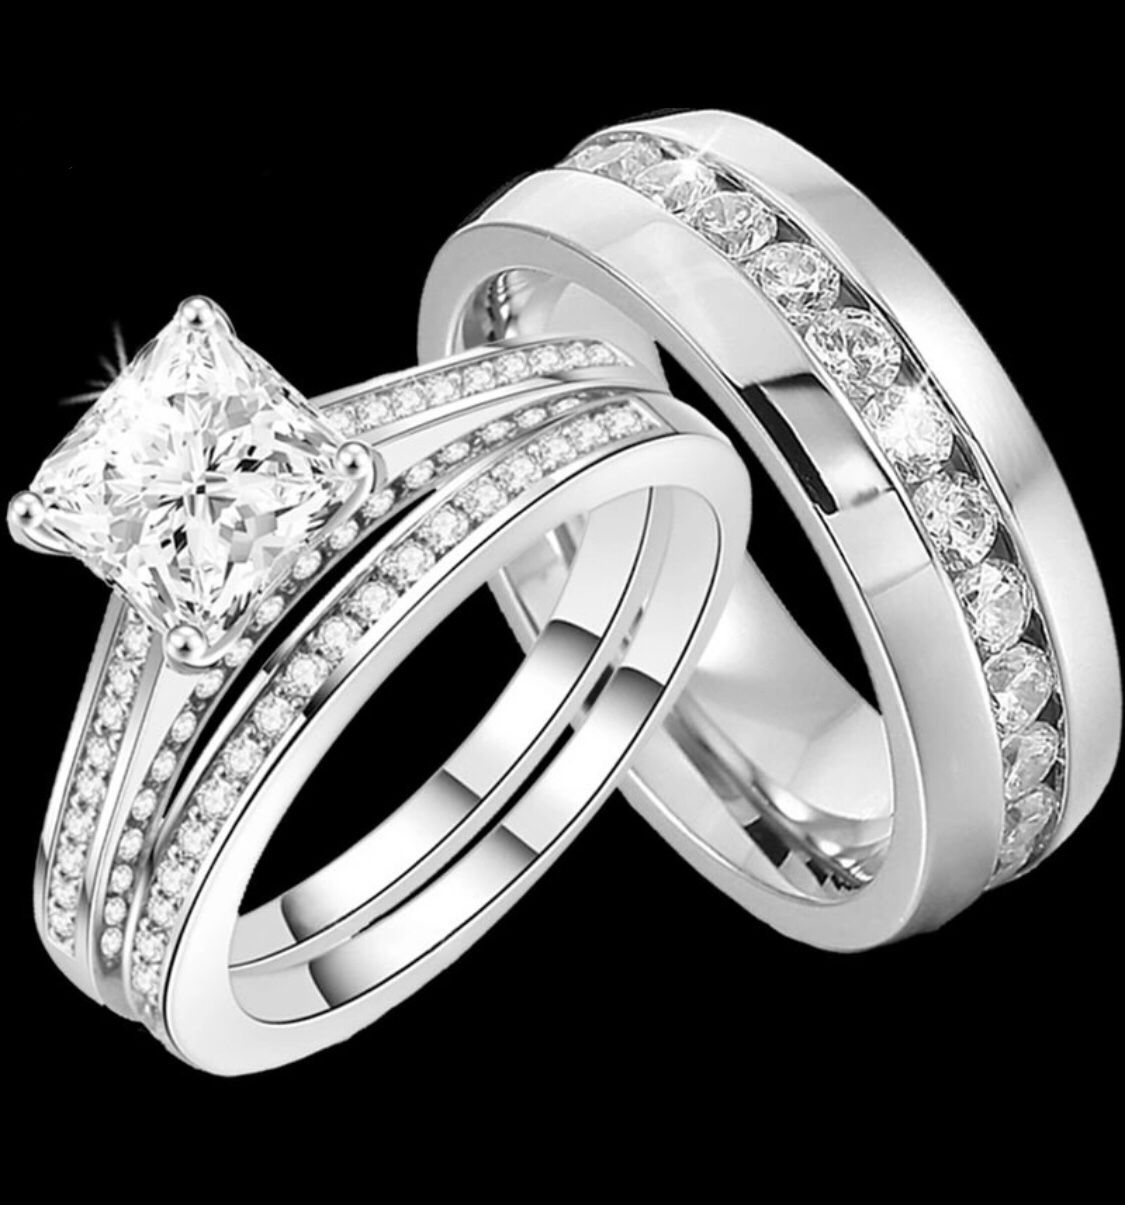 New 18 k white gold wedding ring set engagement ring his and hers